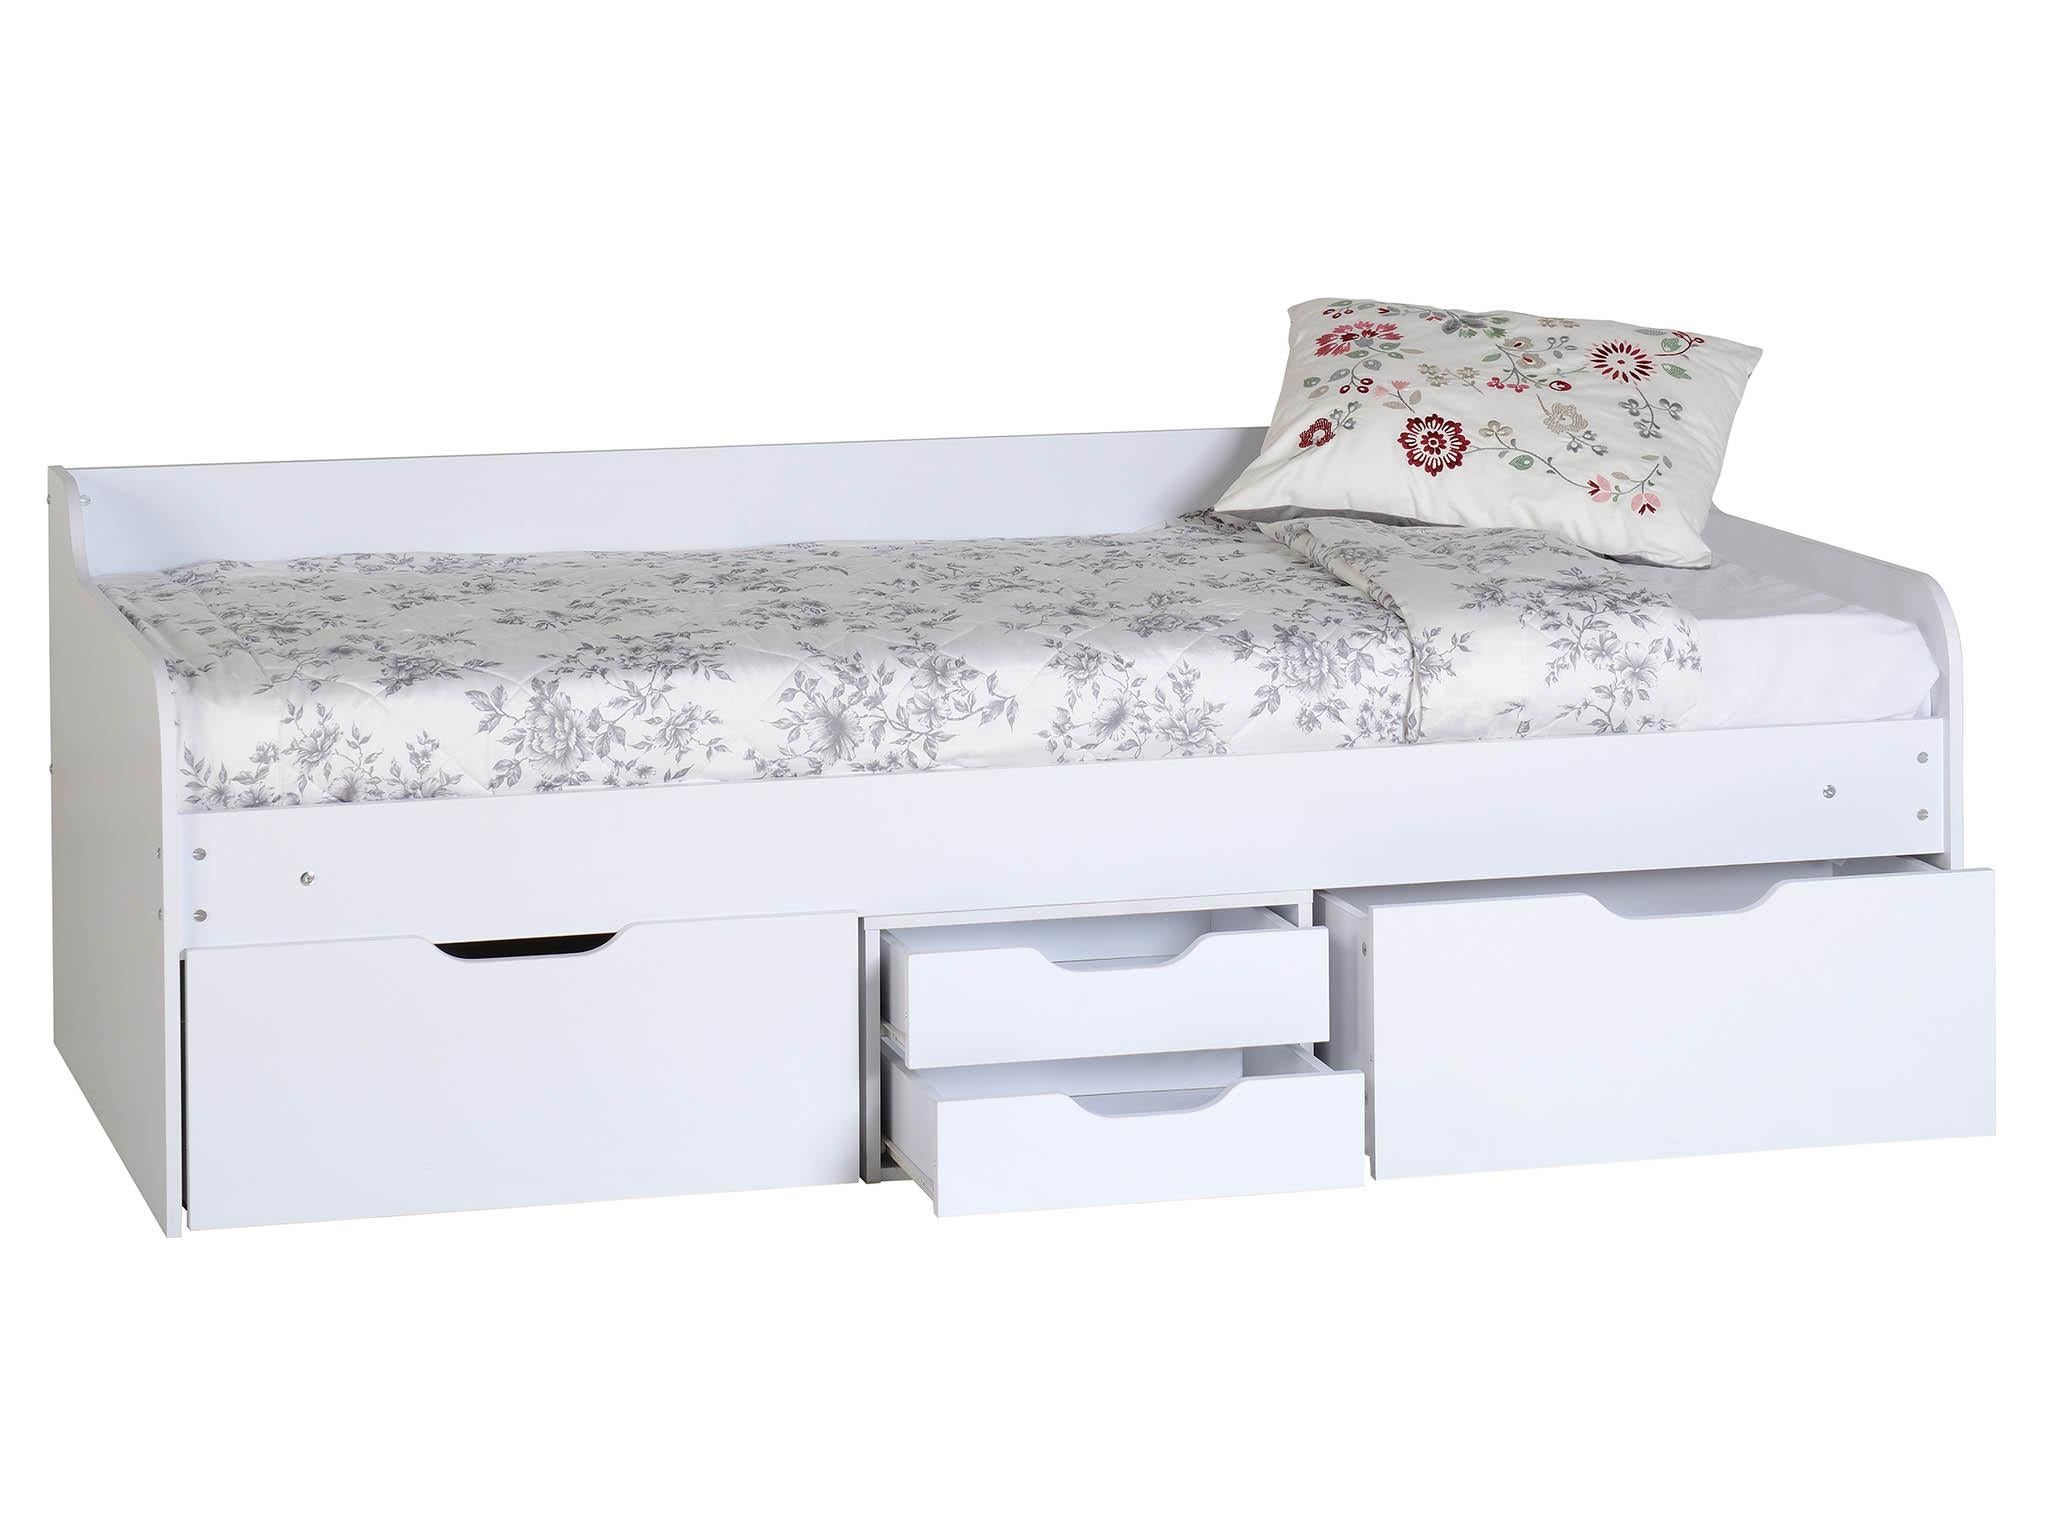 childrens single bed with drawers